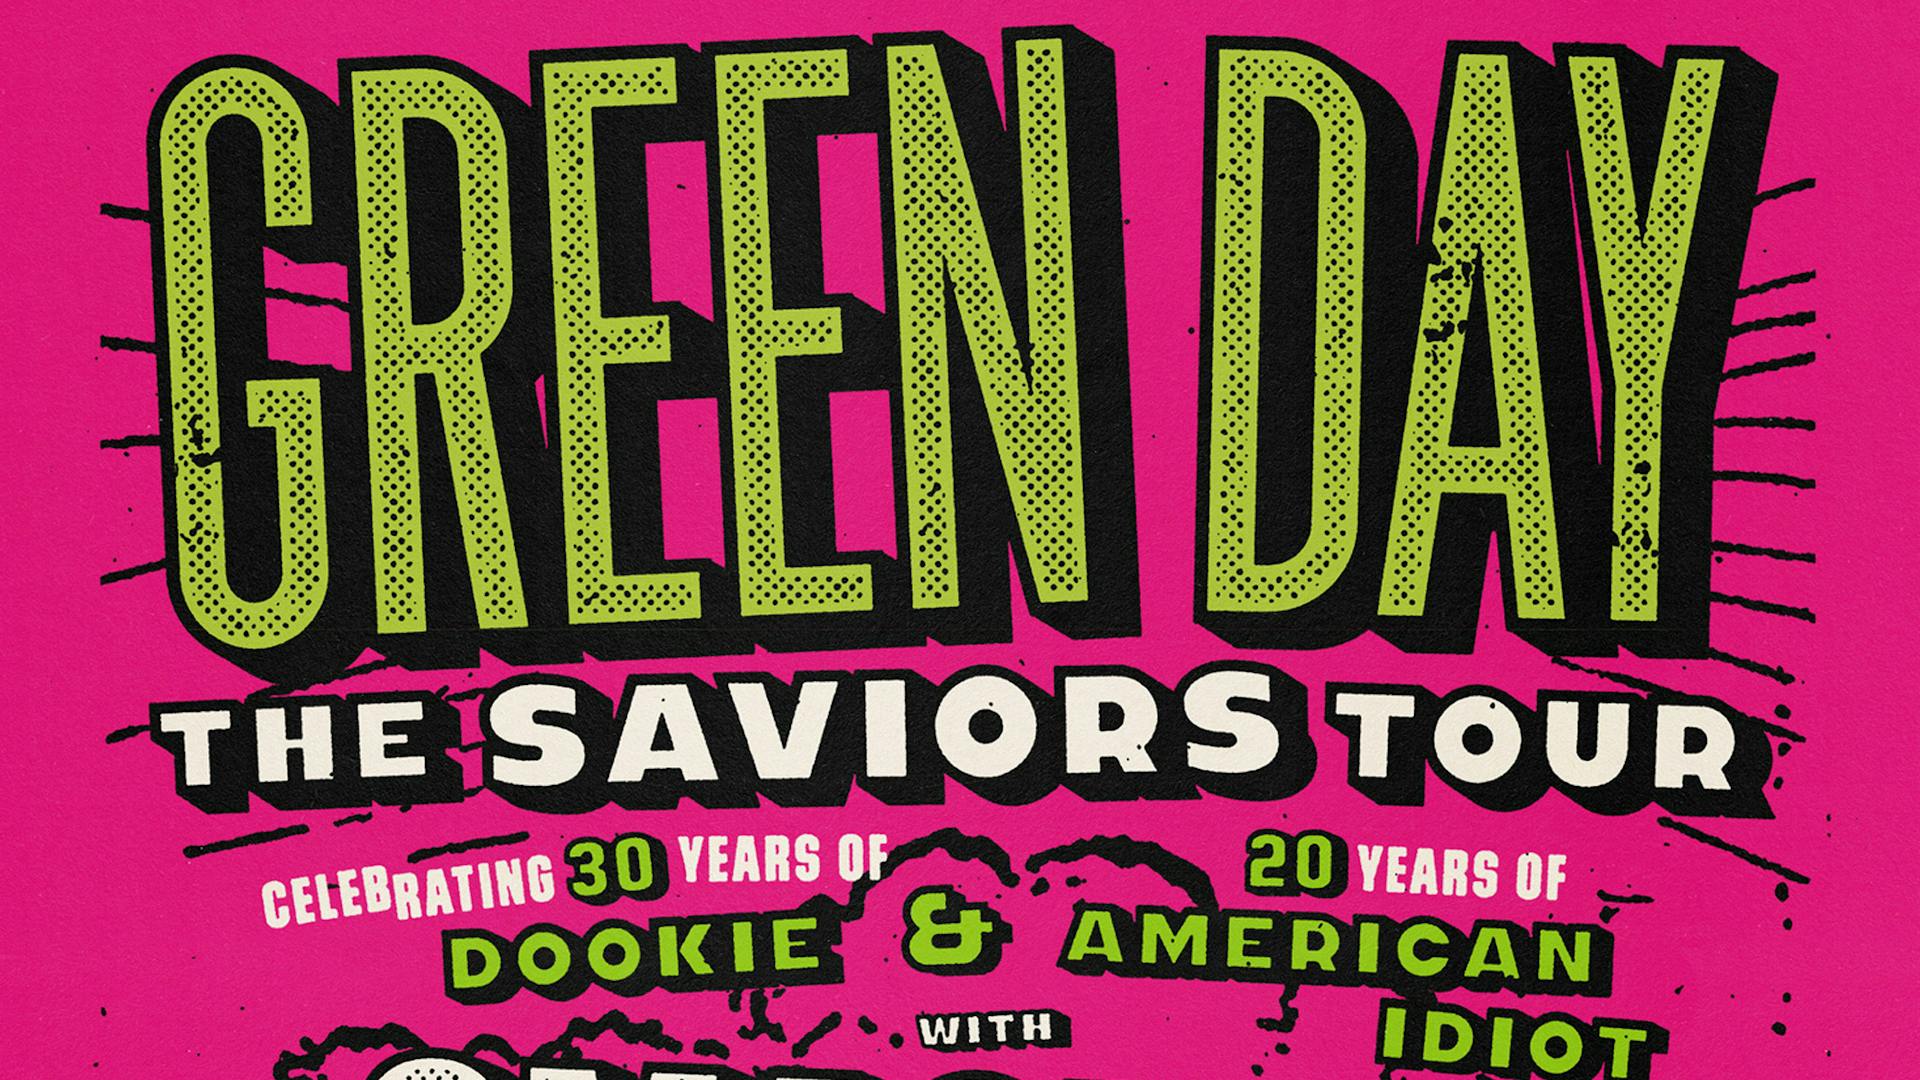 10 lesser known Green Day songs that everyone needs to hear Kerrang!